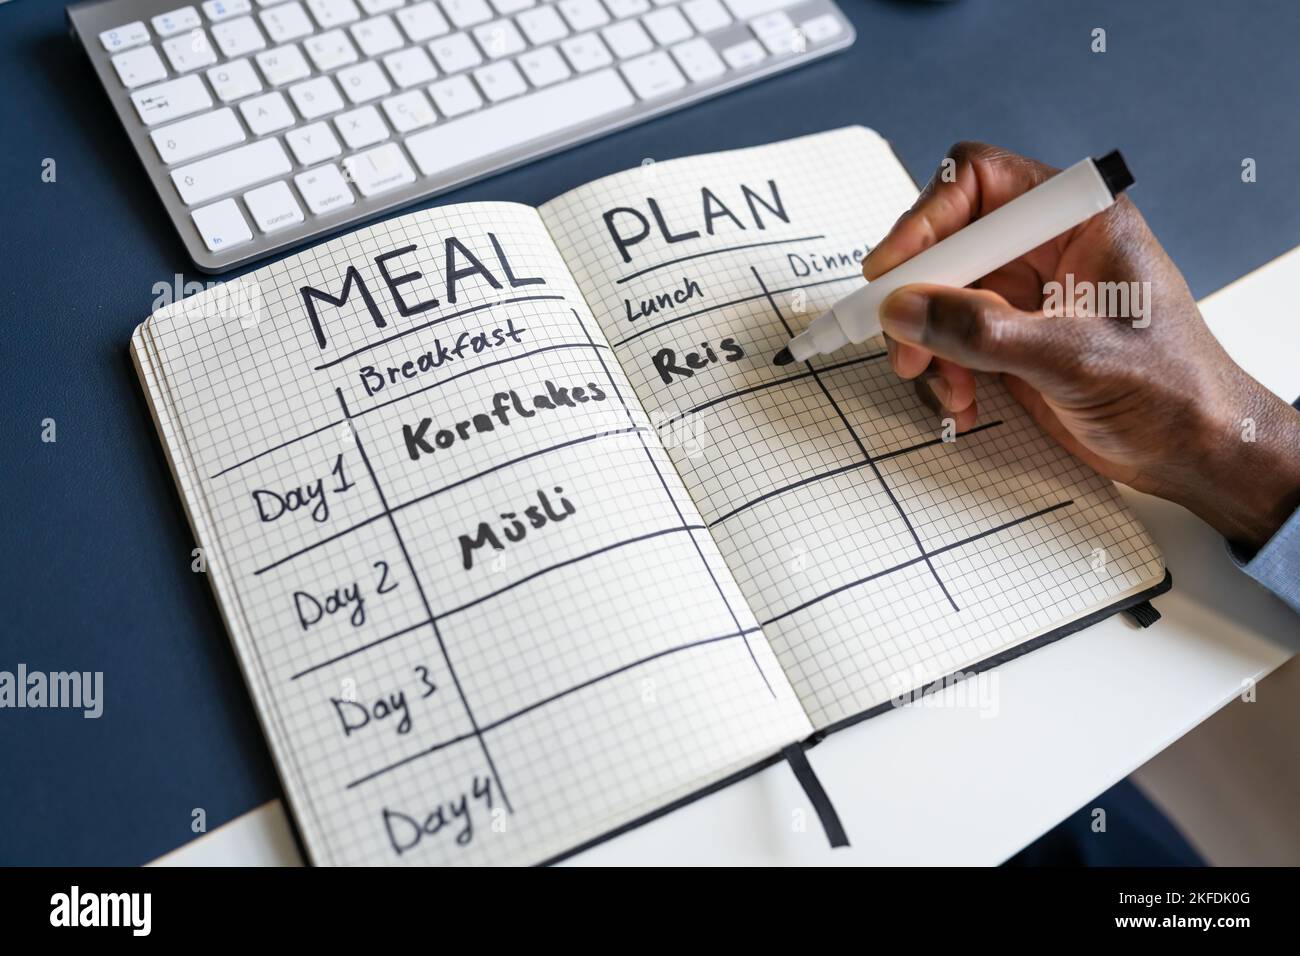 Diet Meal Plan And Nutrition Goals List Stock Photo